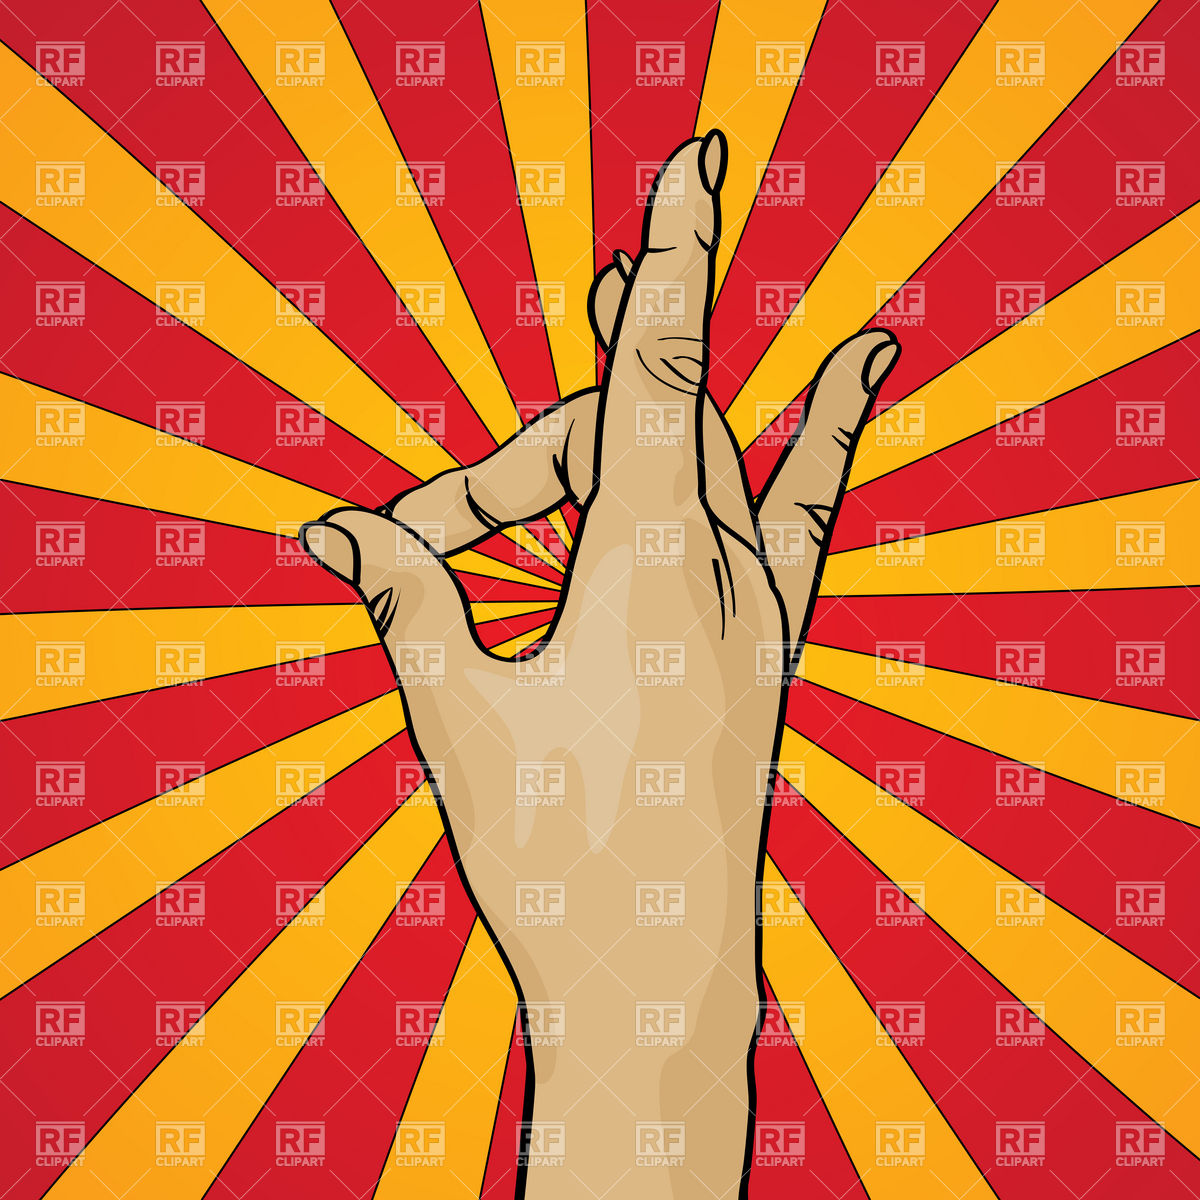 Blessing Hand Sign Signs Symbols Maps Download Royalty Free Vector    